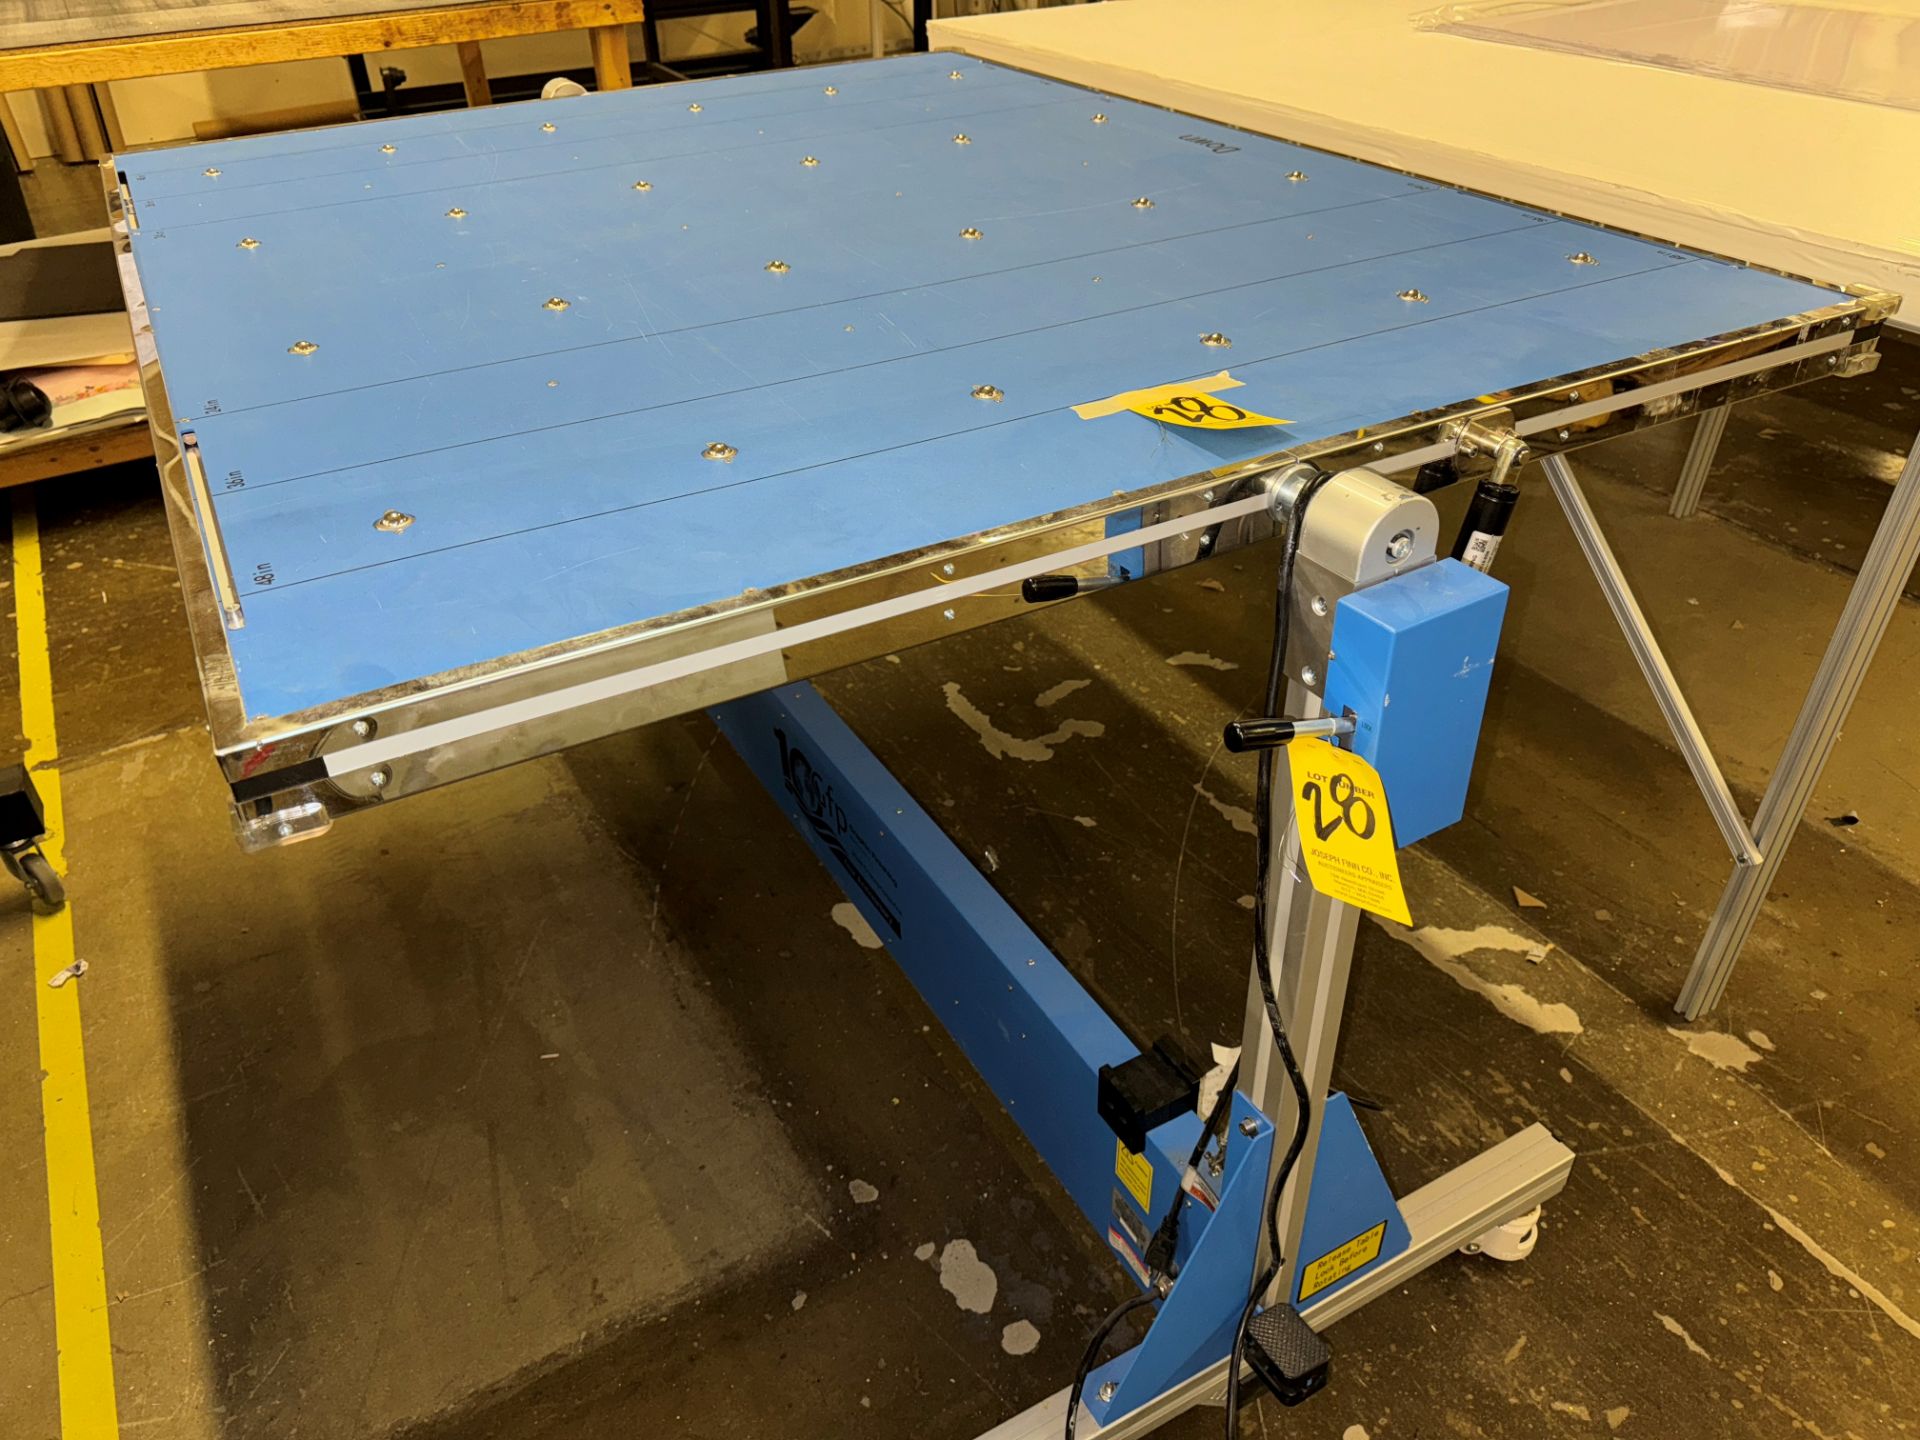 Graphics Finishing GFP FT60 Laminator Roller Table, S/N 1903FT60010, 4' | Rig Fee $120